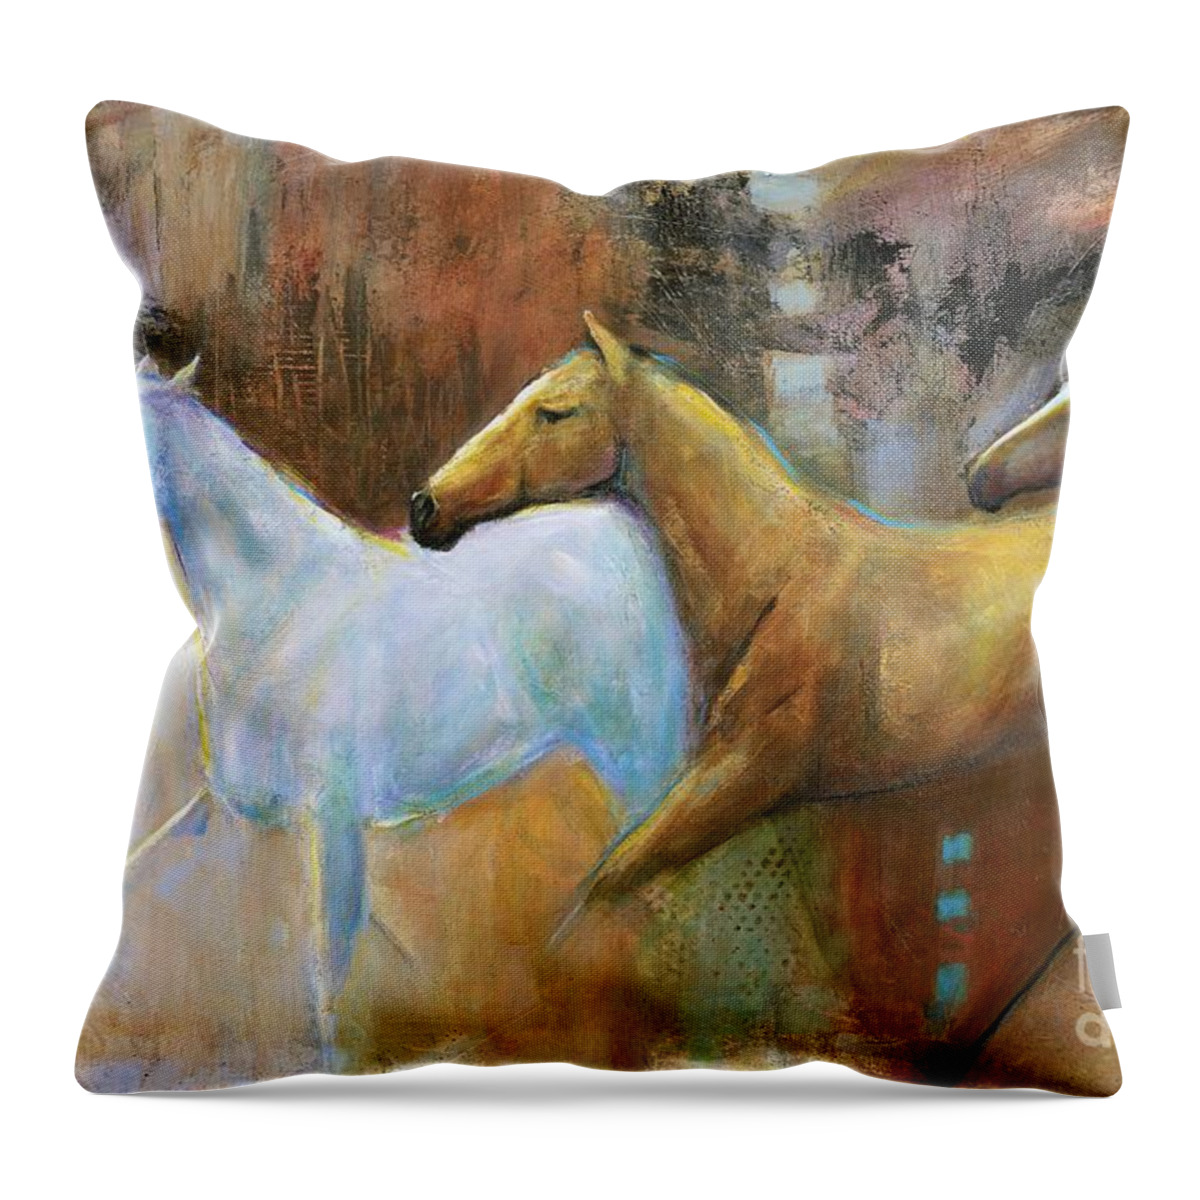 Equine Art Throw Pillow featuring the painting The Reflection of the White Horse by Frances Marino